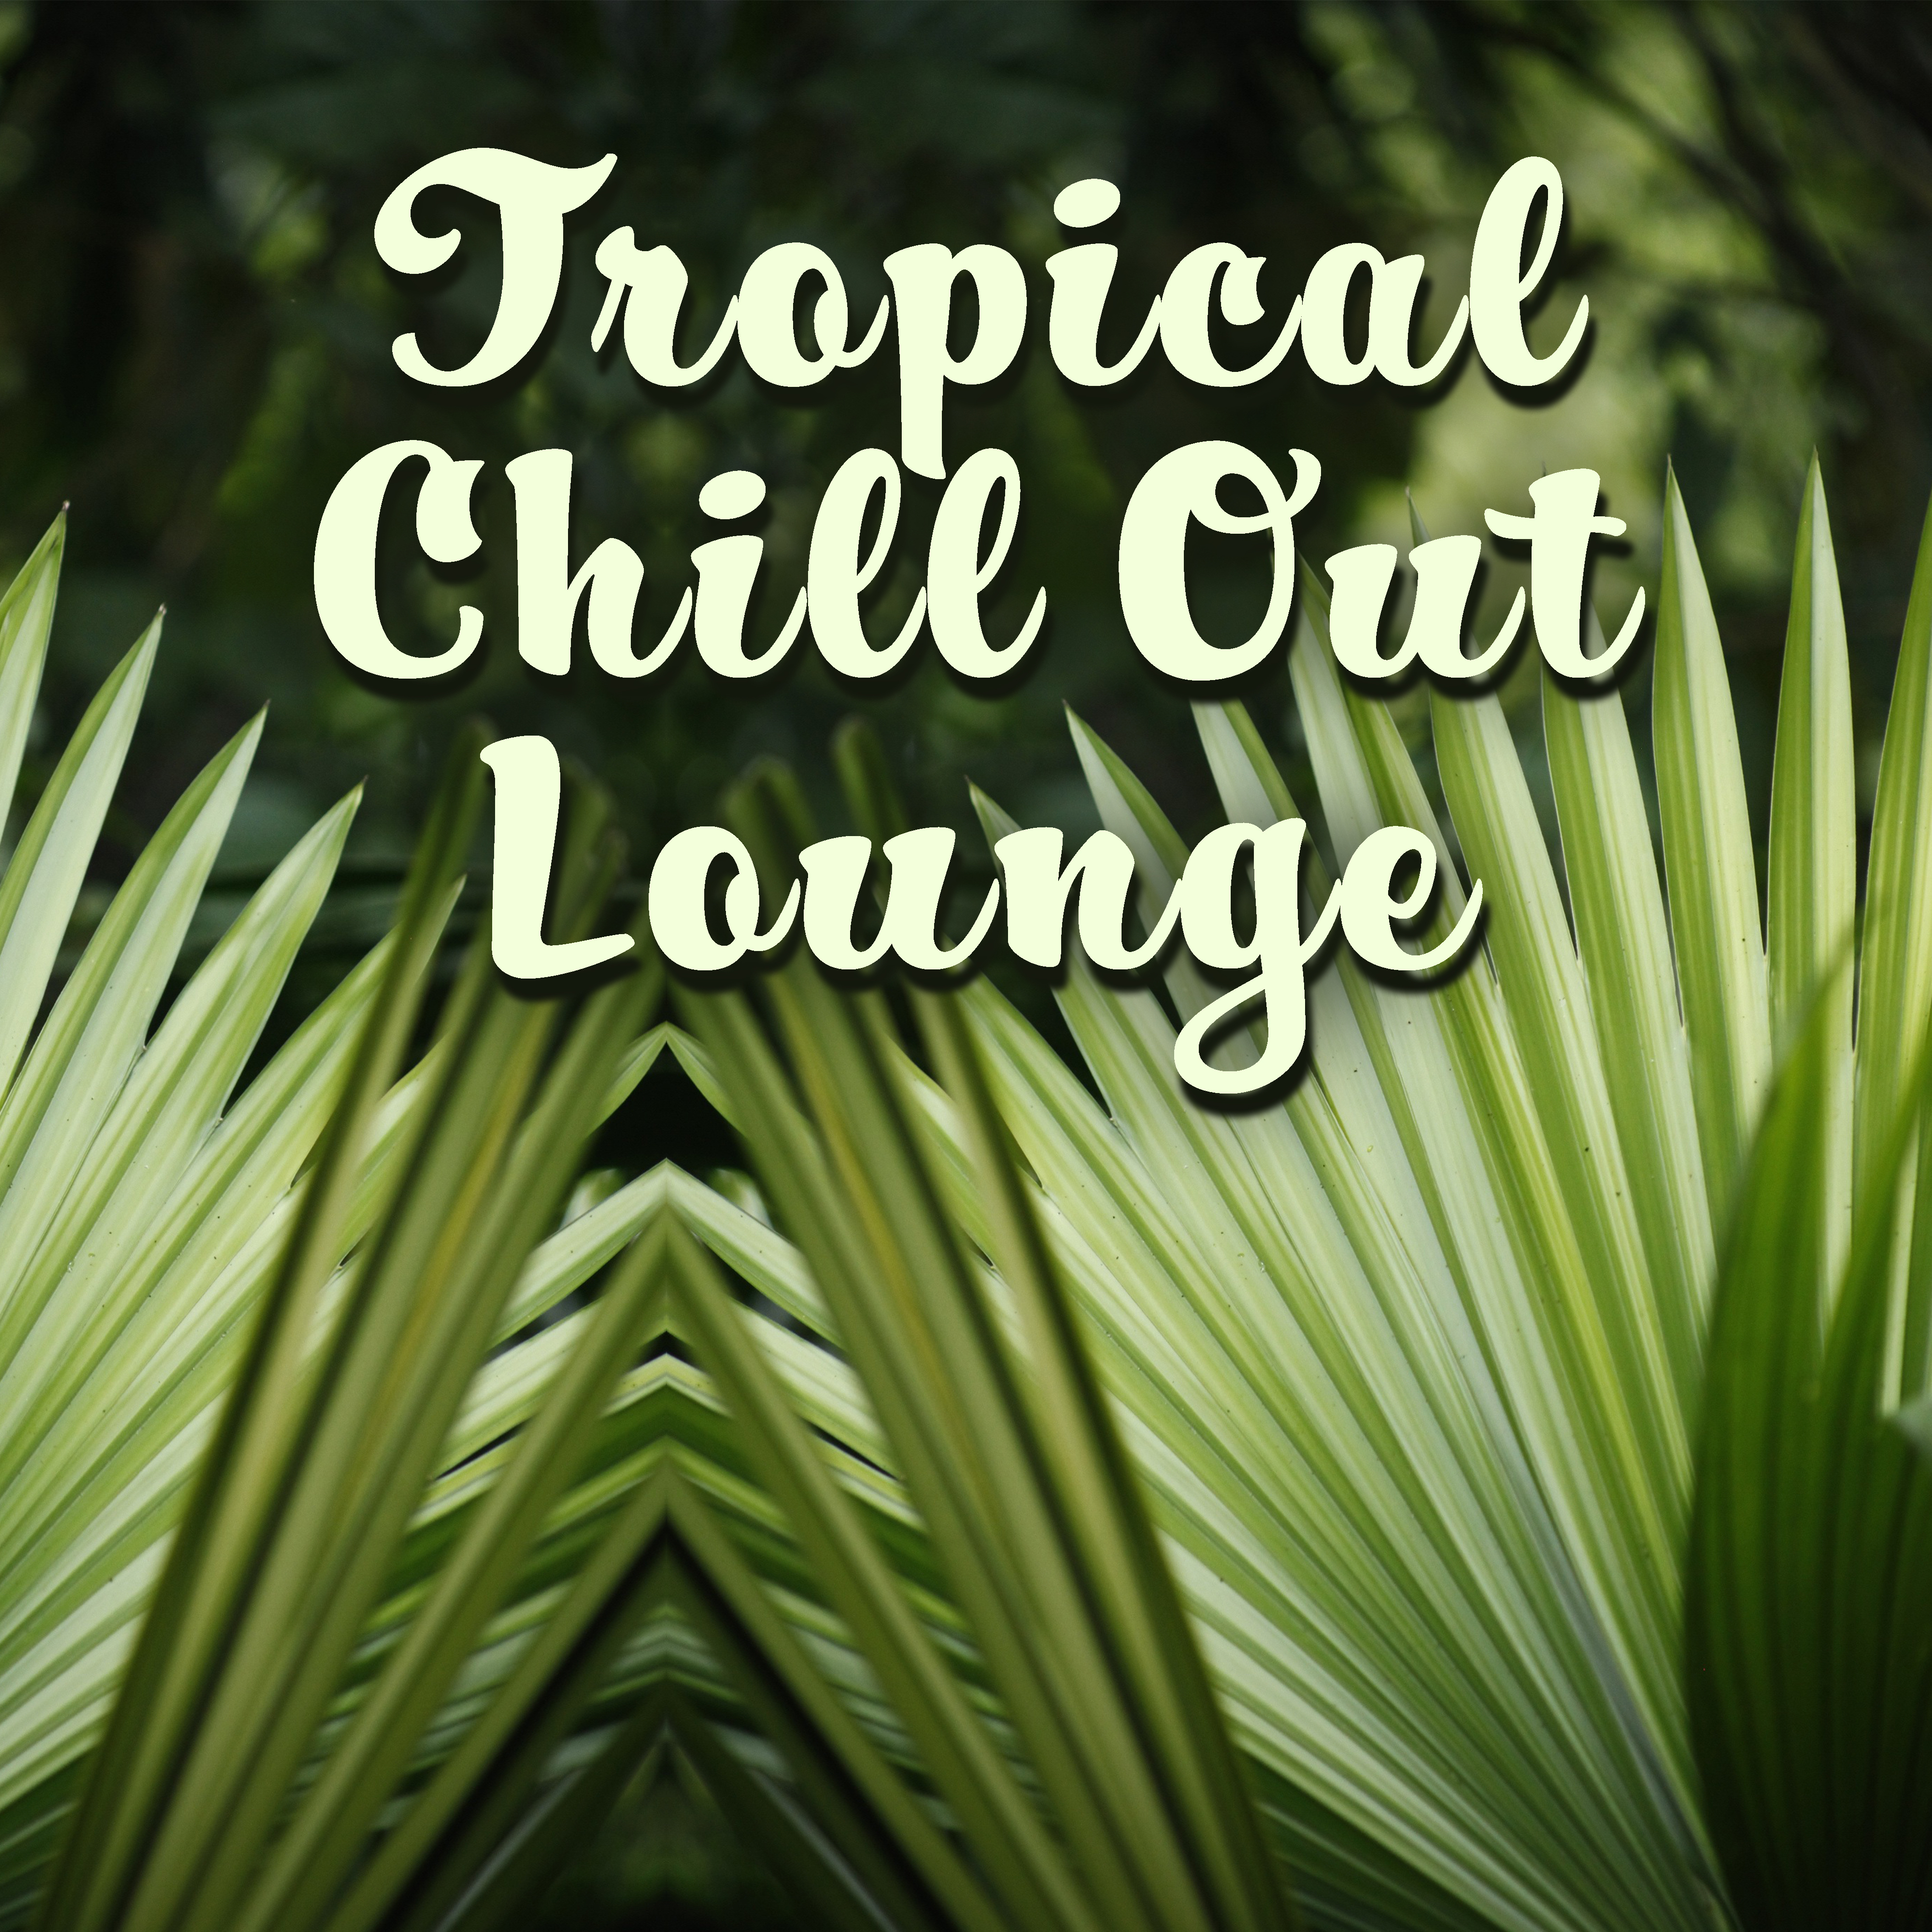 Tropical Chill Out Lounge – Summer Vibes, Stress Relief, Peaceful Mind, Easy Listening, Beach Lounge